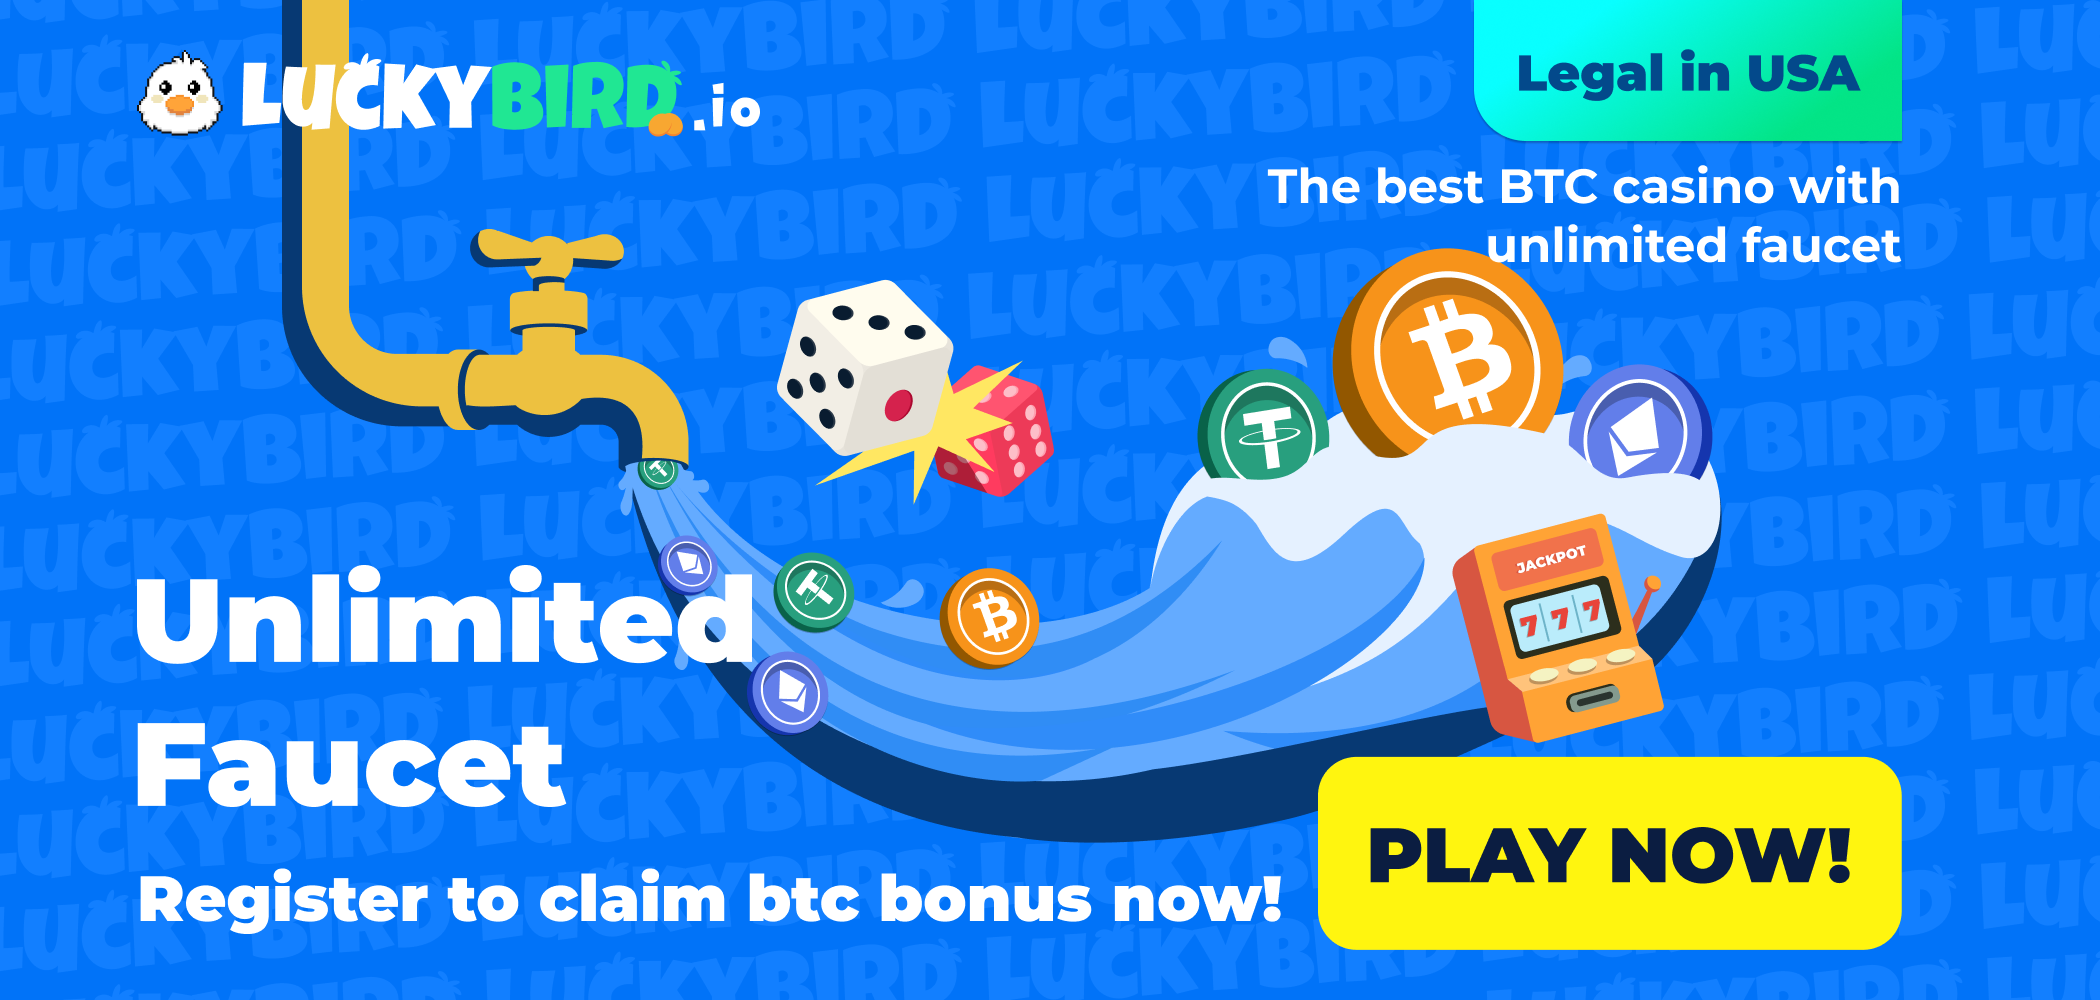 LuckyBird social sweepstakes casino | play to earn | unlimited faucet